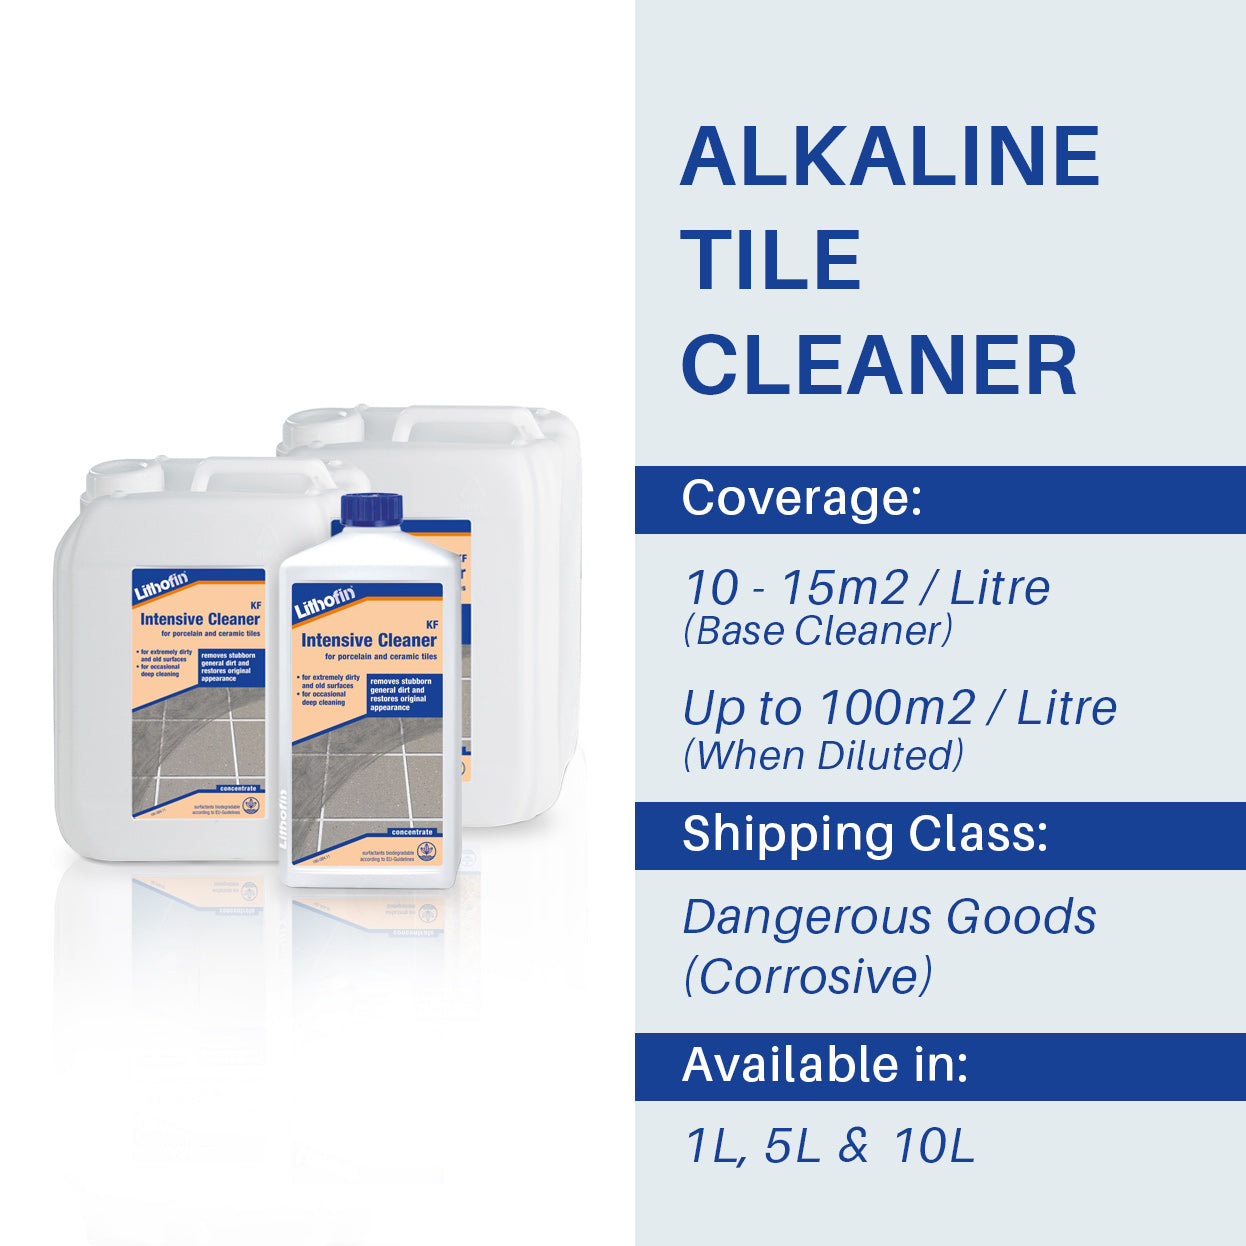 Lithofin KF Intensive Cleaner - Stone Doctor Australia - Porcelain & Ceramic Tiles > Alkaline Product > Deep Periodic Cleaning